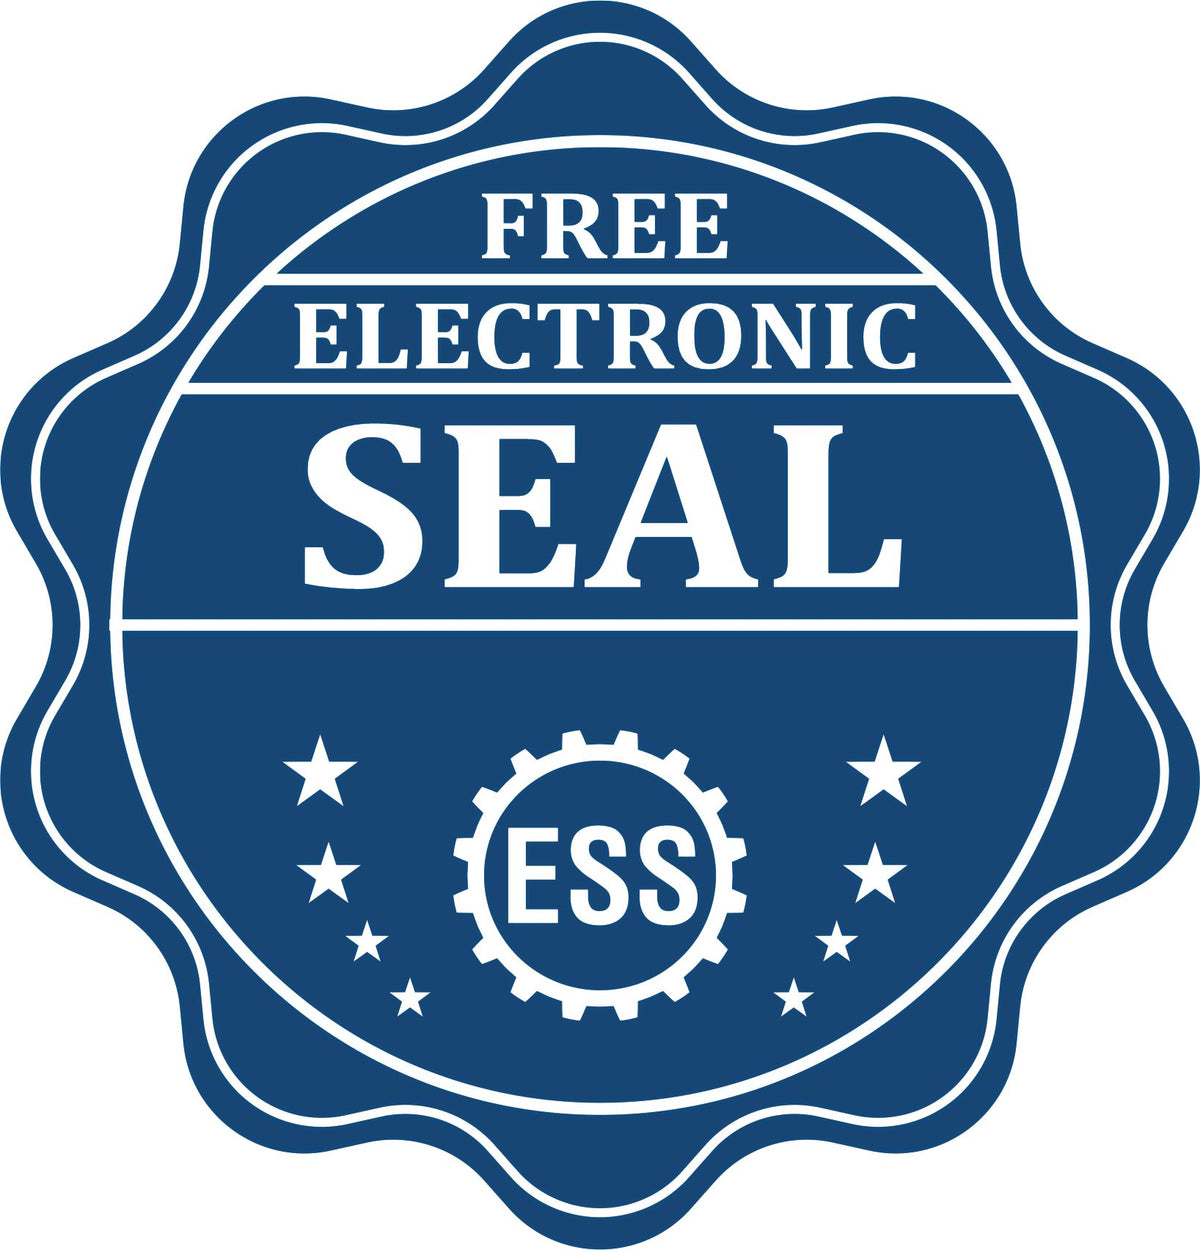 A badge showing a free electronic seal for the Hybrid New York Engineer Seal with stars and the ESS gear on the emblem.